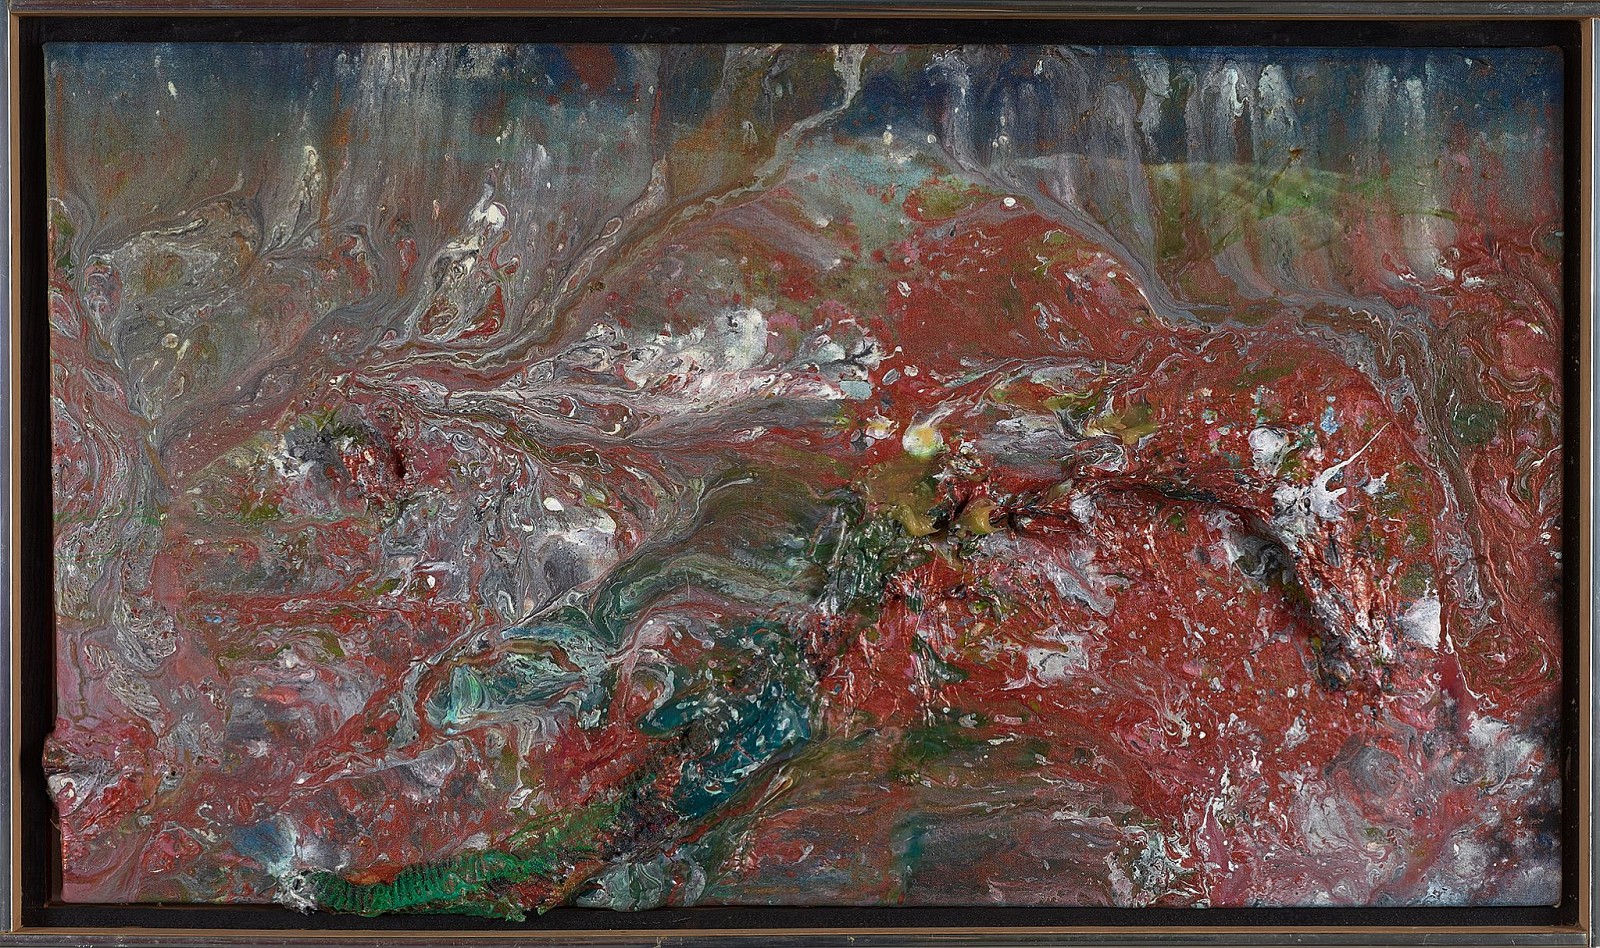 Frank Bowling, Foaming | SOLD, 1983
Acrylic on canvas, 20 x 35 1/2 in. (50.8 x 90.2 cm)
SOLD
BOW-00007